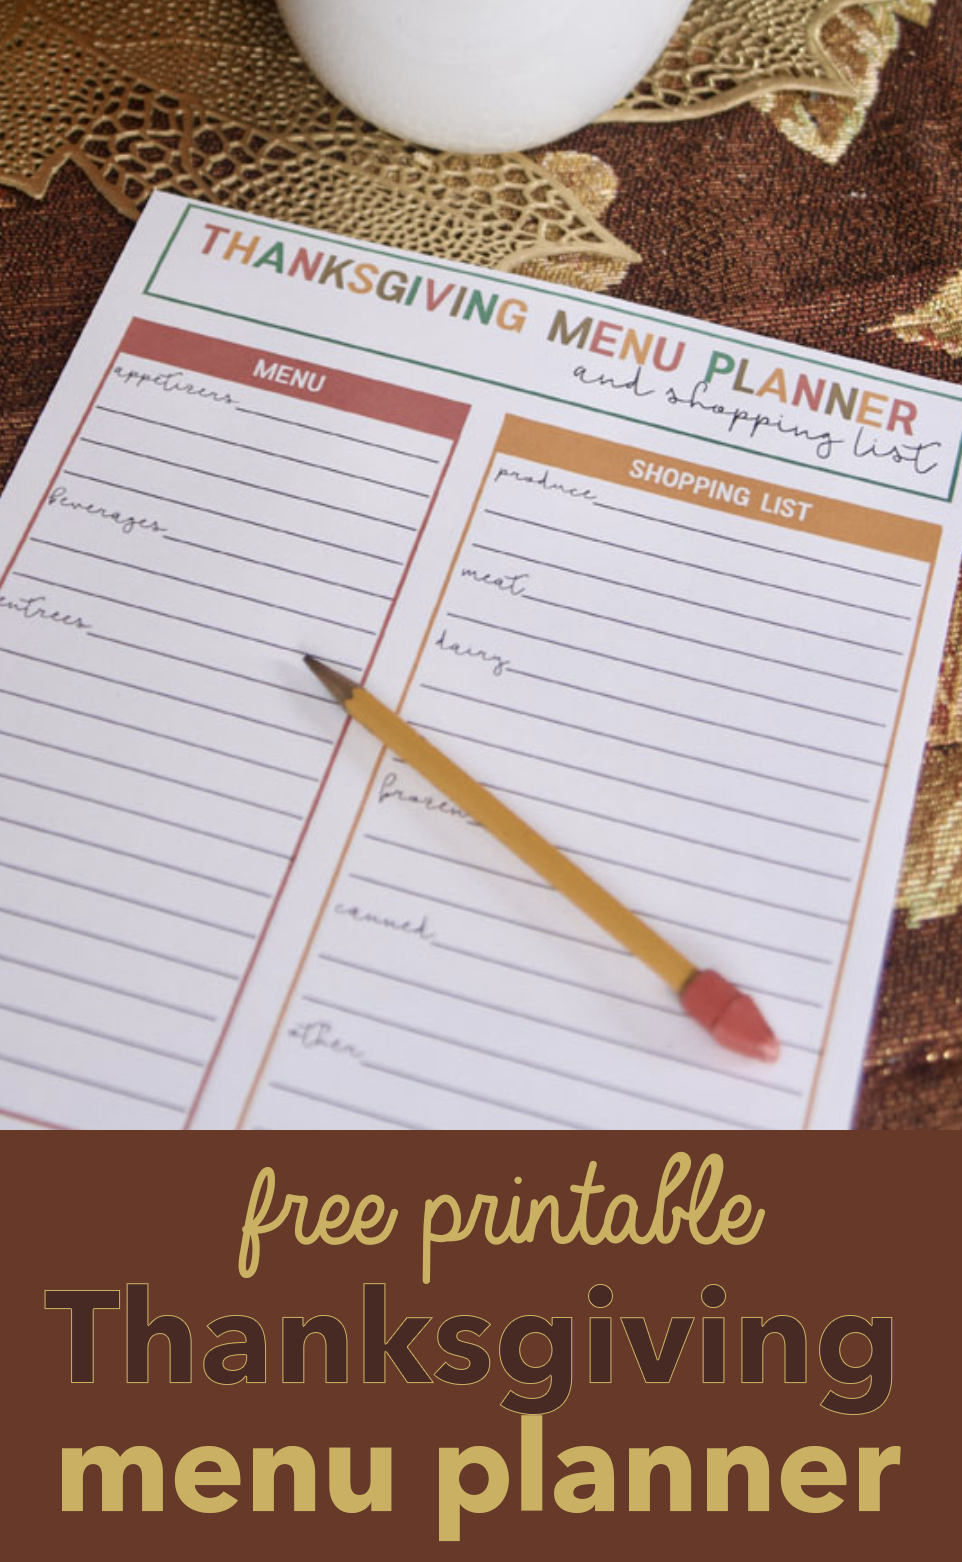 This free printable Thanksgiving menu planner gives you a place to write your menu list items plus everything you need for your shopping list. Plan your budget well ahead of Thanksgiving Day in order to have your best meal ever! via @lara_neves